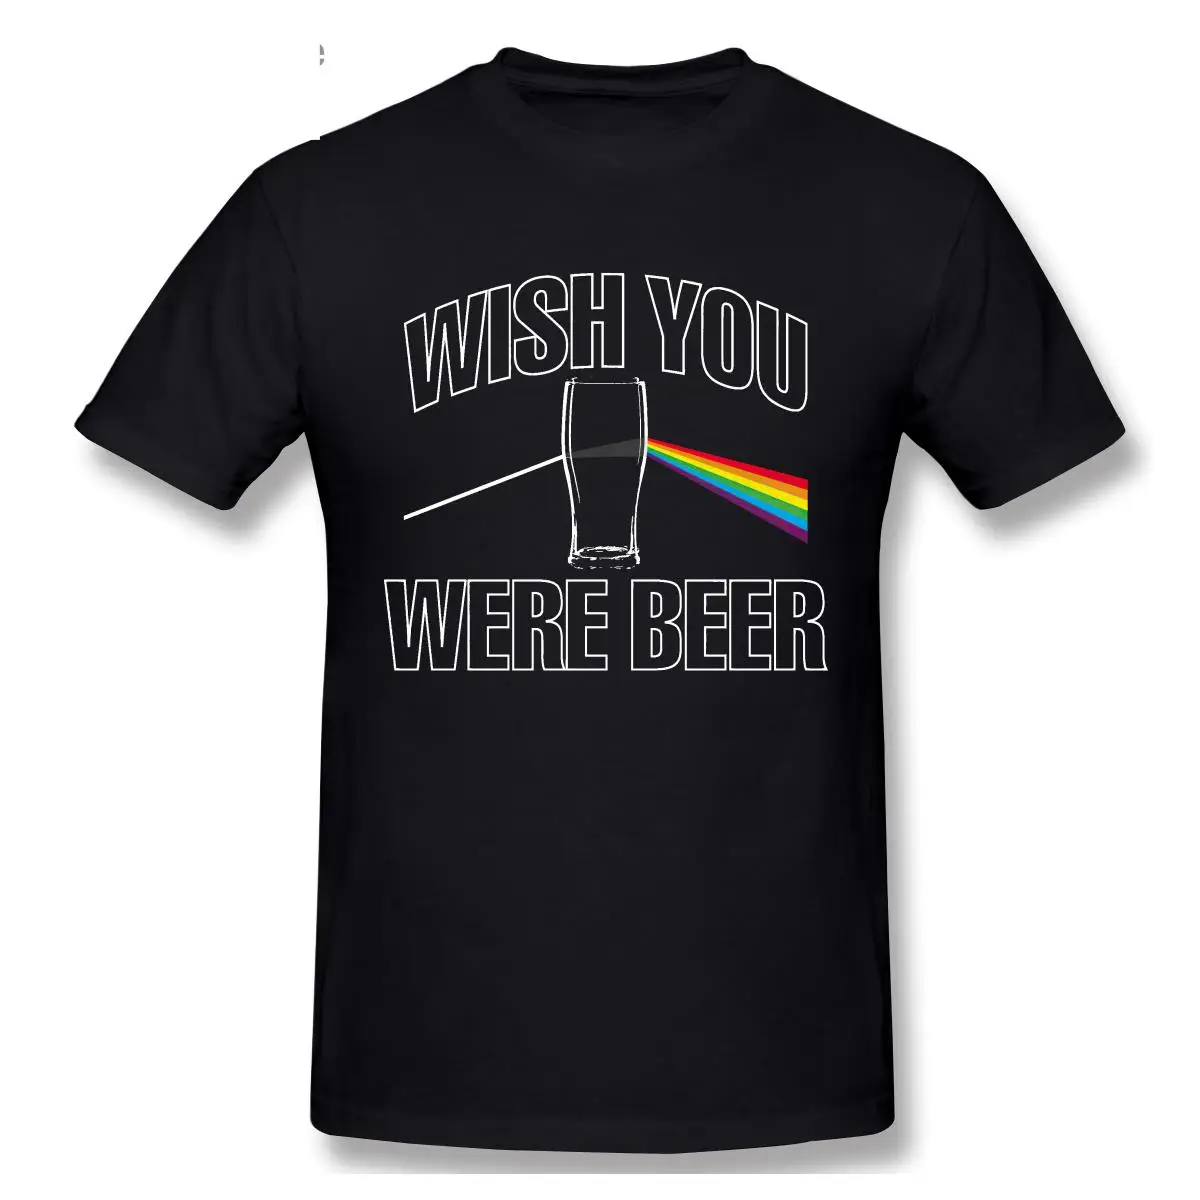 

Wish You Were Beer Funny Mens T Shirt - Real Ale Home Brew Gift Dad Birthday